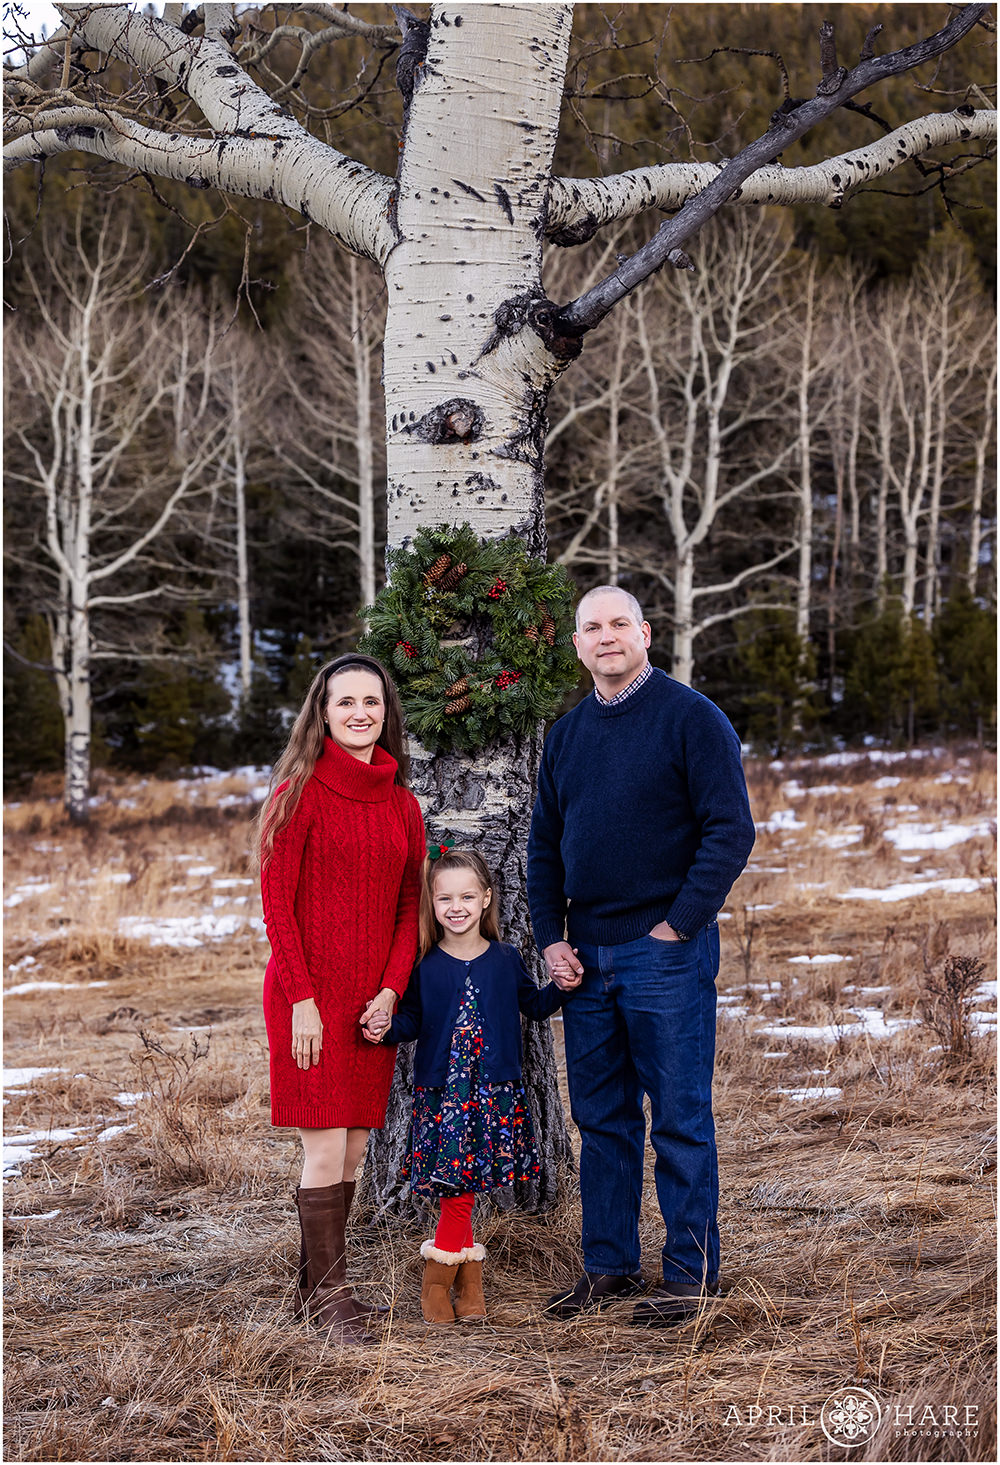 Christmas family portrait with a pretty wreath hanging on an aspen tree in Colorado